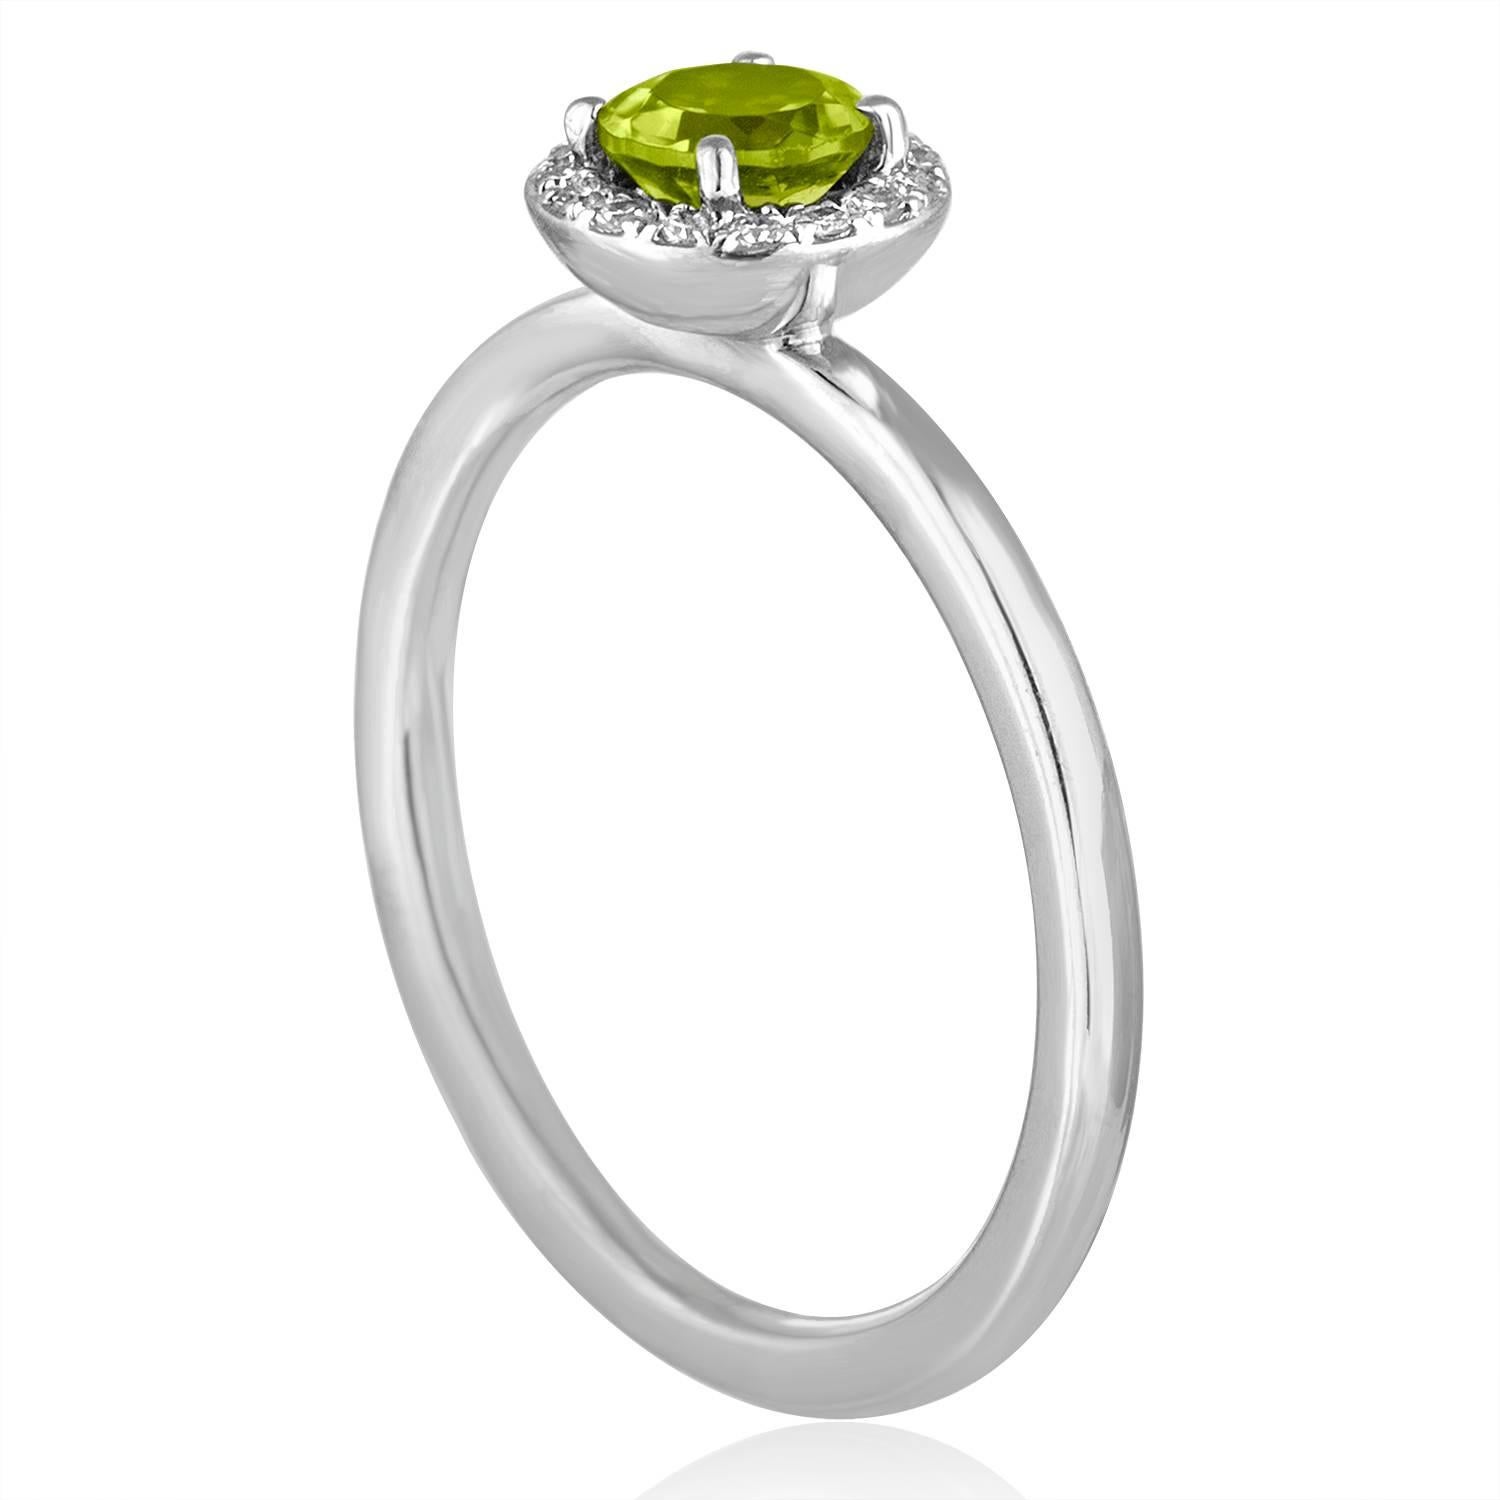 Stackable Peridot Ring
The ring is 14K White Gold
There are 0.06 Carats In Diamonds H SI
The Center Stone is Round 0.57 Carat Peridot
The top measures 5/16